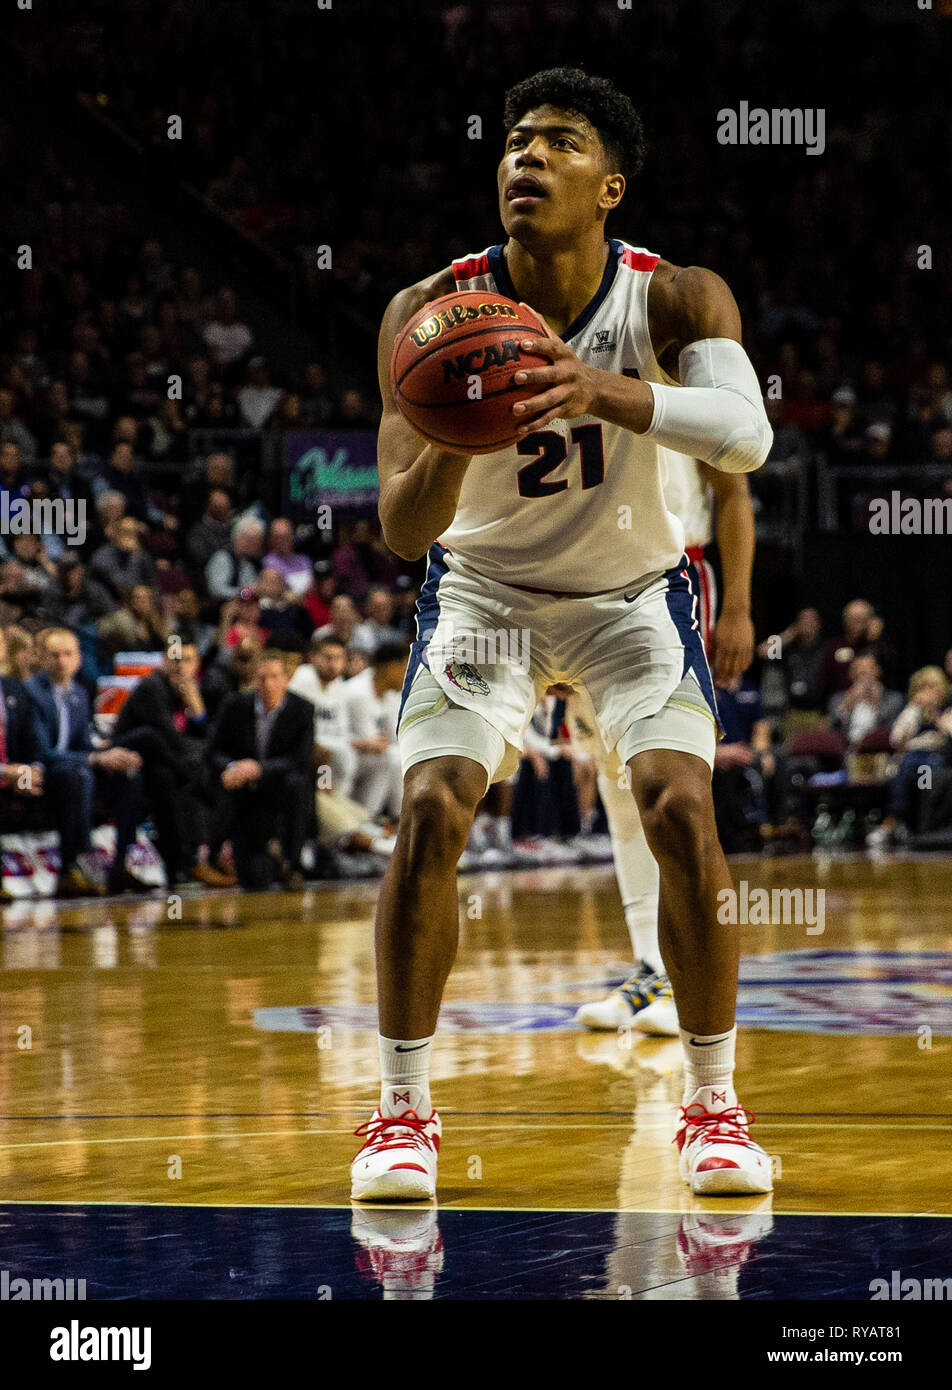 Mar 12 2019 Las Vegas, NV, U.S.A. Gonzaga forward Rui Hachimura (21) at the free throw line during the NCAA West Coast Conference Men's Basketball Tournament championship between the Gonzaga Bulldogs and the Saint Mary's Gaels 47-60 lost at Orleans Arena Las Vegas, NV. Thurman James/CSM Stock Photo